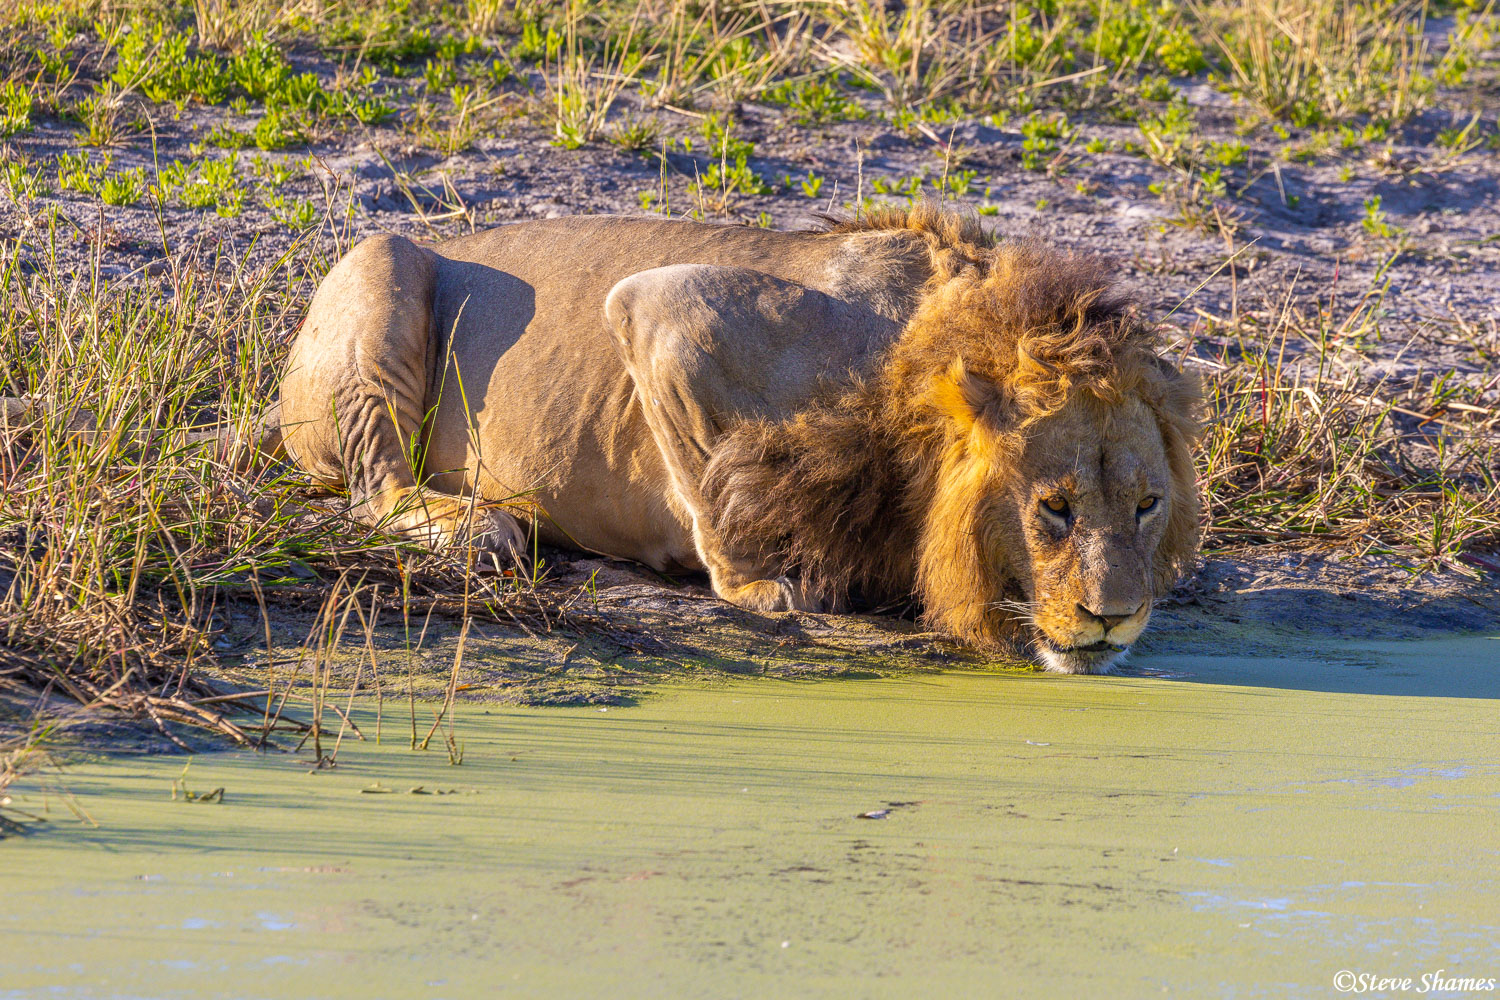 Big lion getting a drink of water. He does not seem to mind the green slime covering the water.